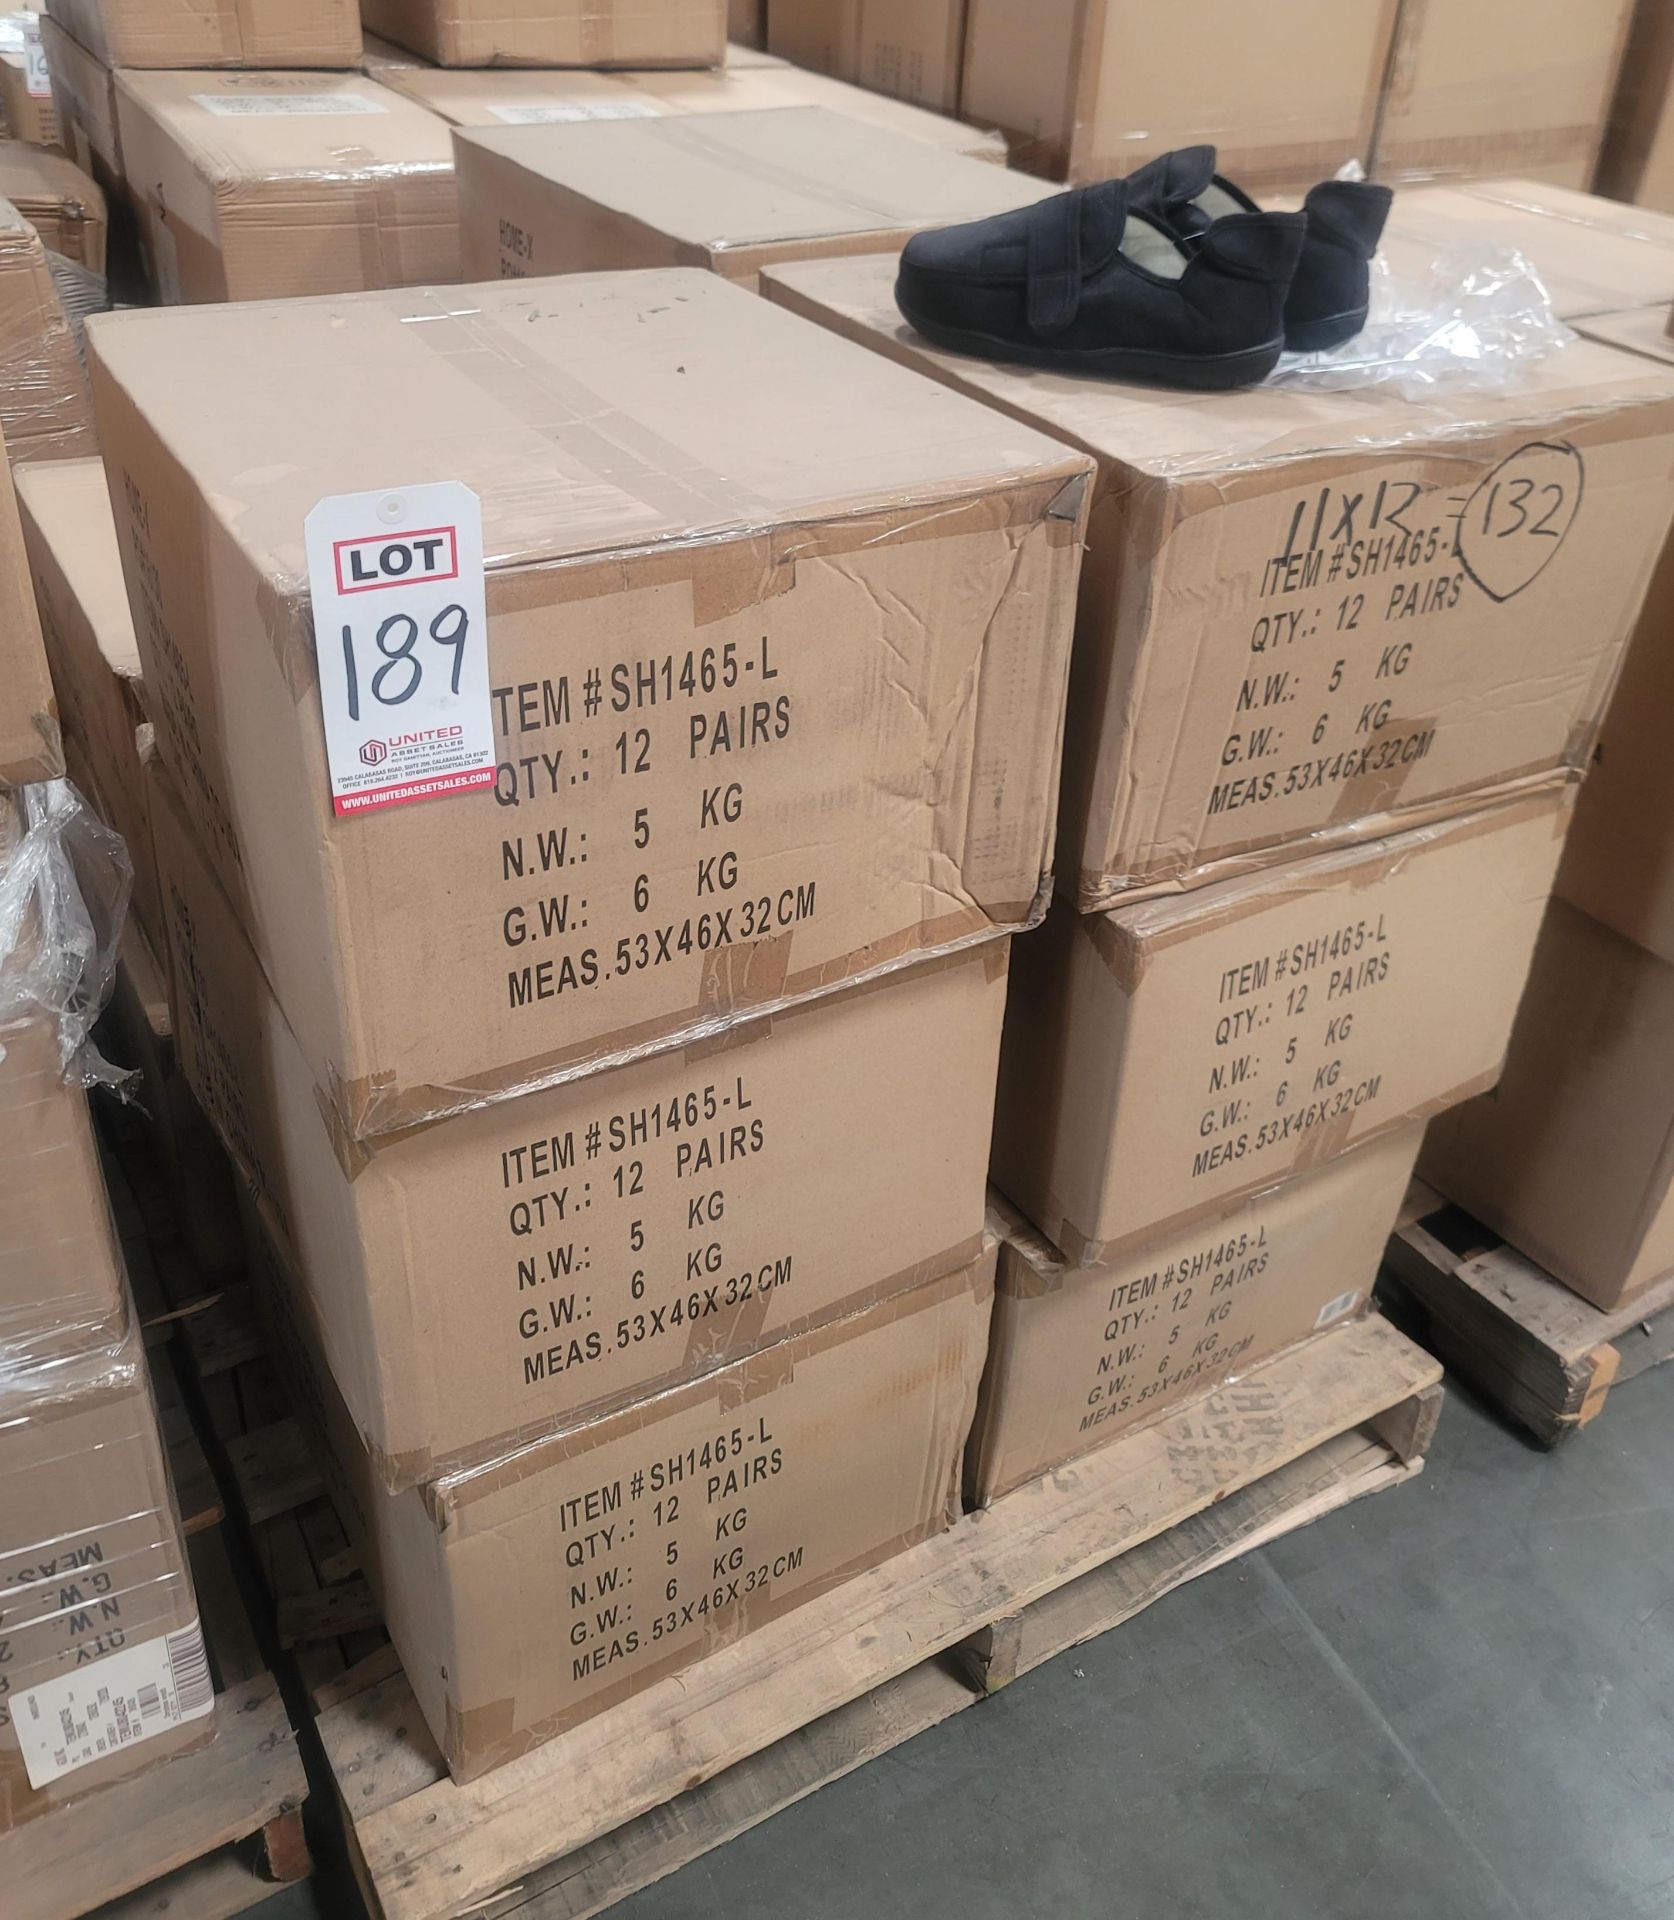 LOT - PALLET OF (132) PAIRS OF LARGE SLIPPERS W/ VELCRO ADJUSTMENT ON INSTEP AND HEEL, (11 CASES/ - Image 3 of 3